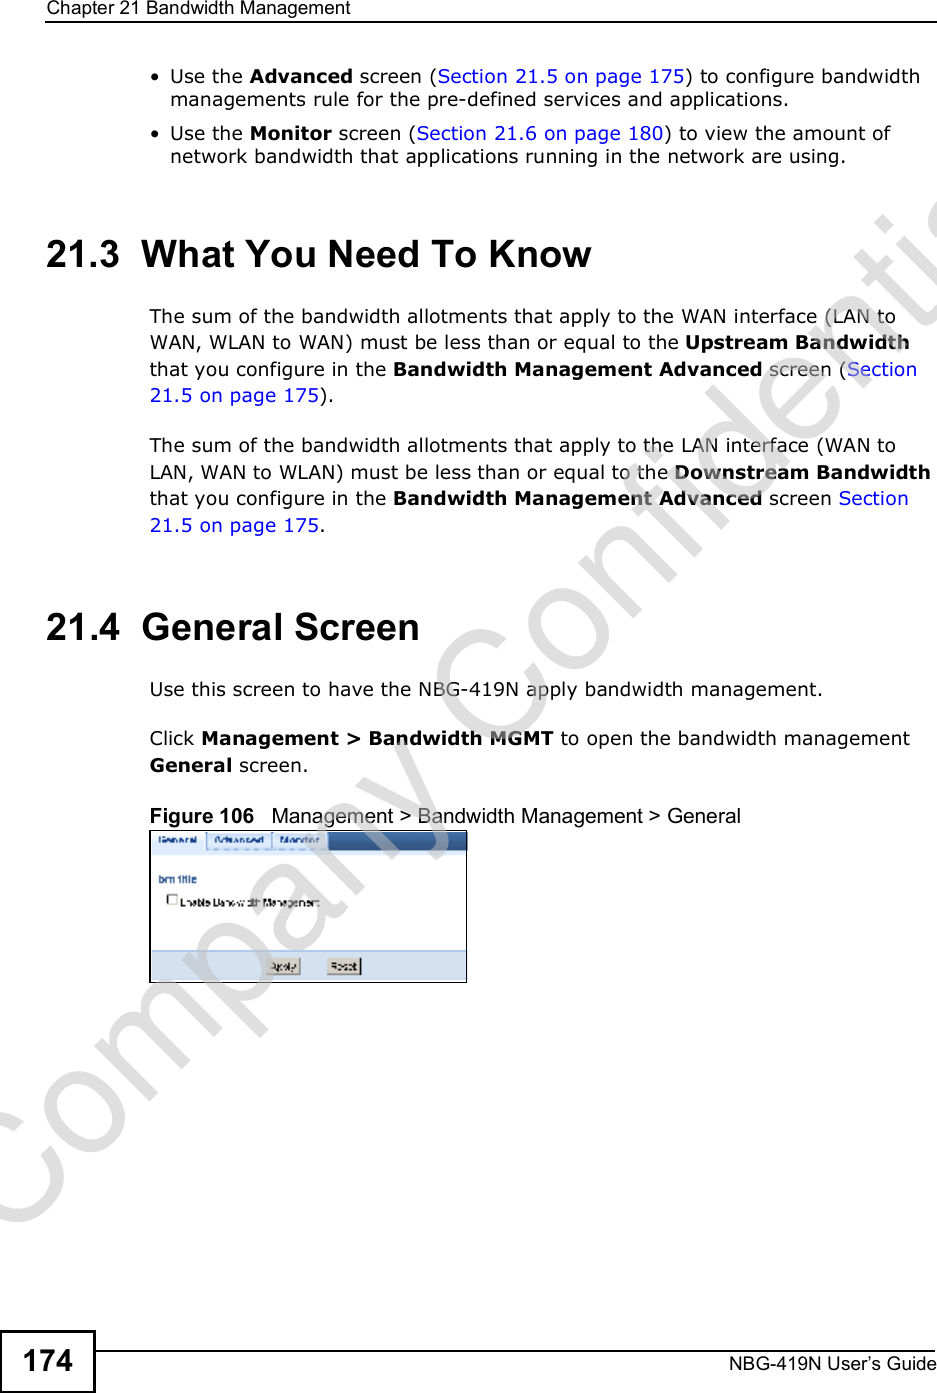 Chapter 21Bandwidth ManagementNBG-419N User s Guide174 Use the Advanced screen (Section 21.5 on page 175) to configure bandwidth managements rule for the pre-defined services and applications. Use the Monitor screen (Section 21.6 on page 180) to view the amount of network bandwidth that applications running in the network are using.21.3  What You Need To KnowThe sum of the bandwidth allotments that apply to the WAN interface (LAN to WAN, WLAN to WAN) must be less than or equal to the Upstream Bandwidth that you configure in the Bandwidth Management Advanced screen (Section 21.5 on page 175). The sum of the bandwidth allotments that apply to the LAN interface (WAN to LAN, WAN to WLAN) must be less than or equal to the Downstream Bandwidth that you configure in the Bandwidth Management Advanced screen Section 21.5 on page 175. 21.4  General Screen Use this screen to have the NBG-419N apply bandwidth management.Click Management &gt; Bandwidth MGMT to open the bandwidth management General screen.Figure 106   Management &gt; Bandwidth Management &gt; General   Company Confidential